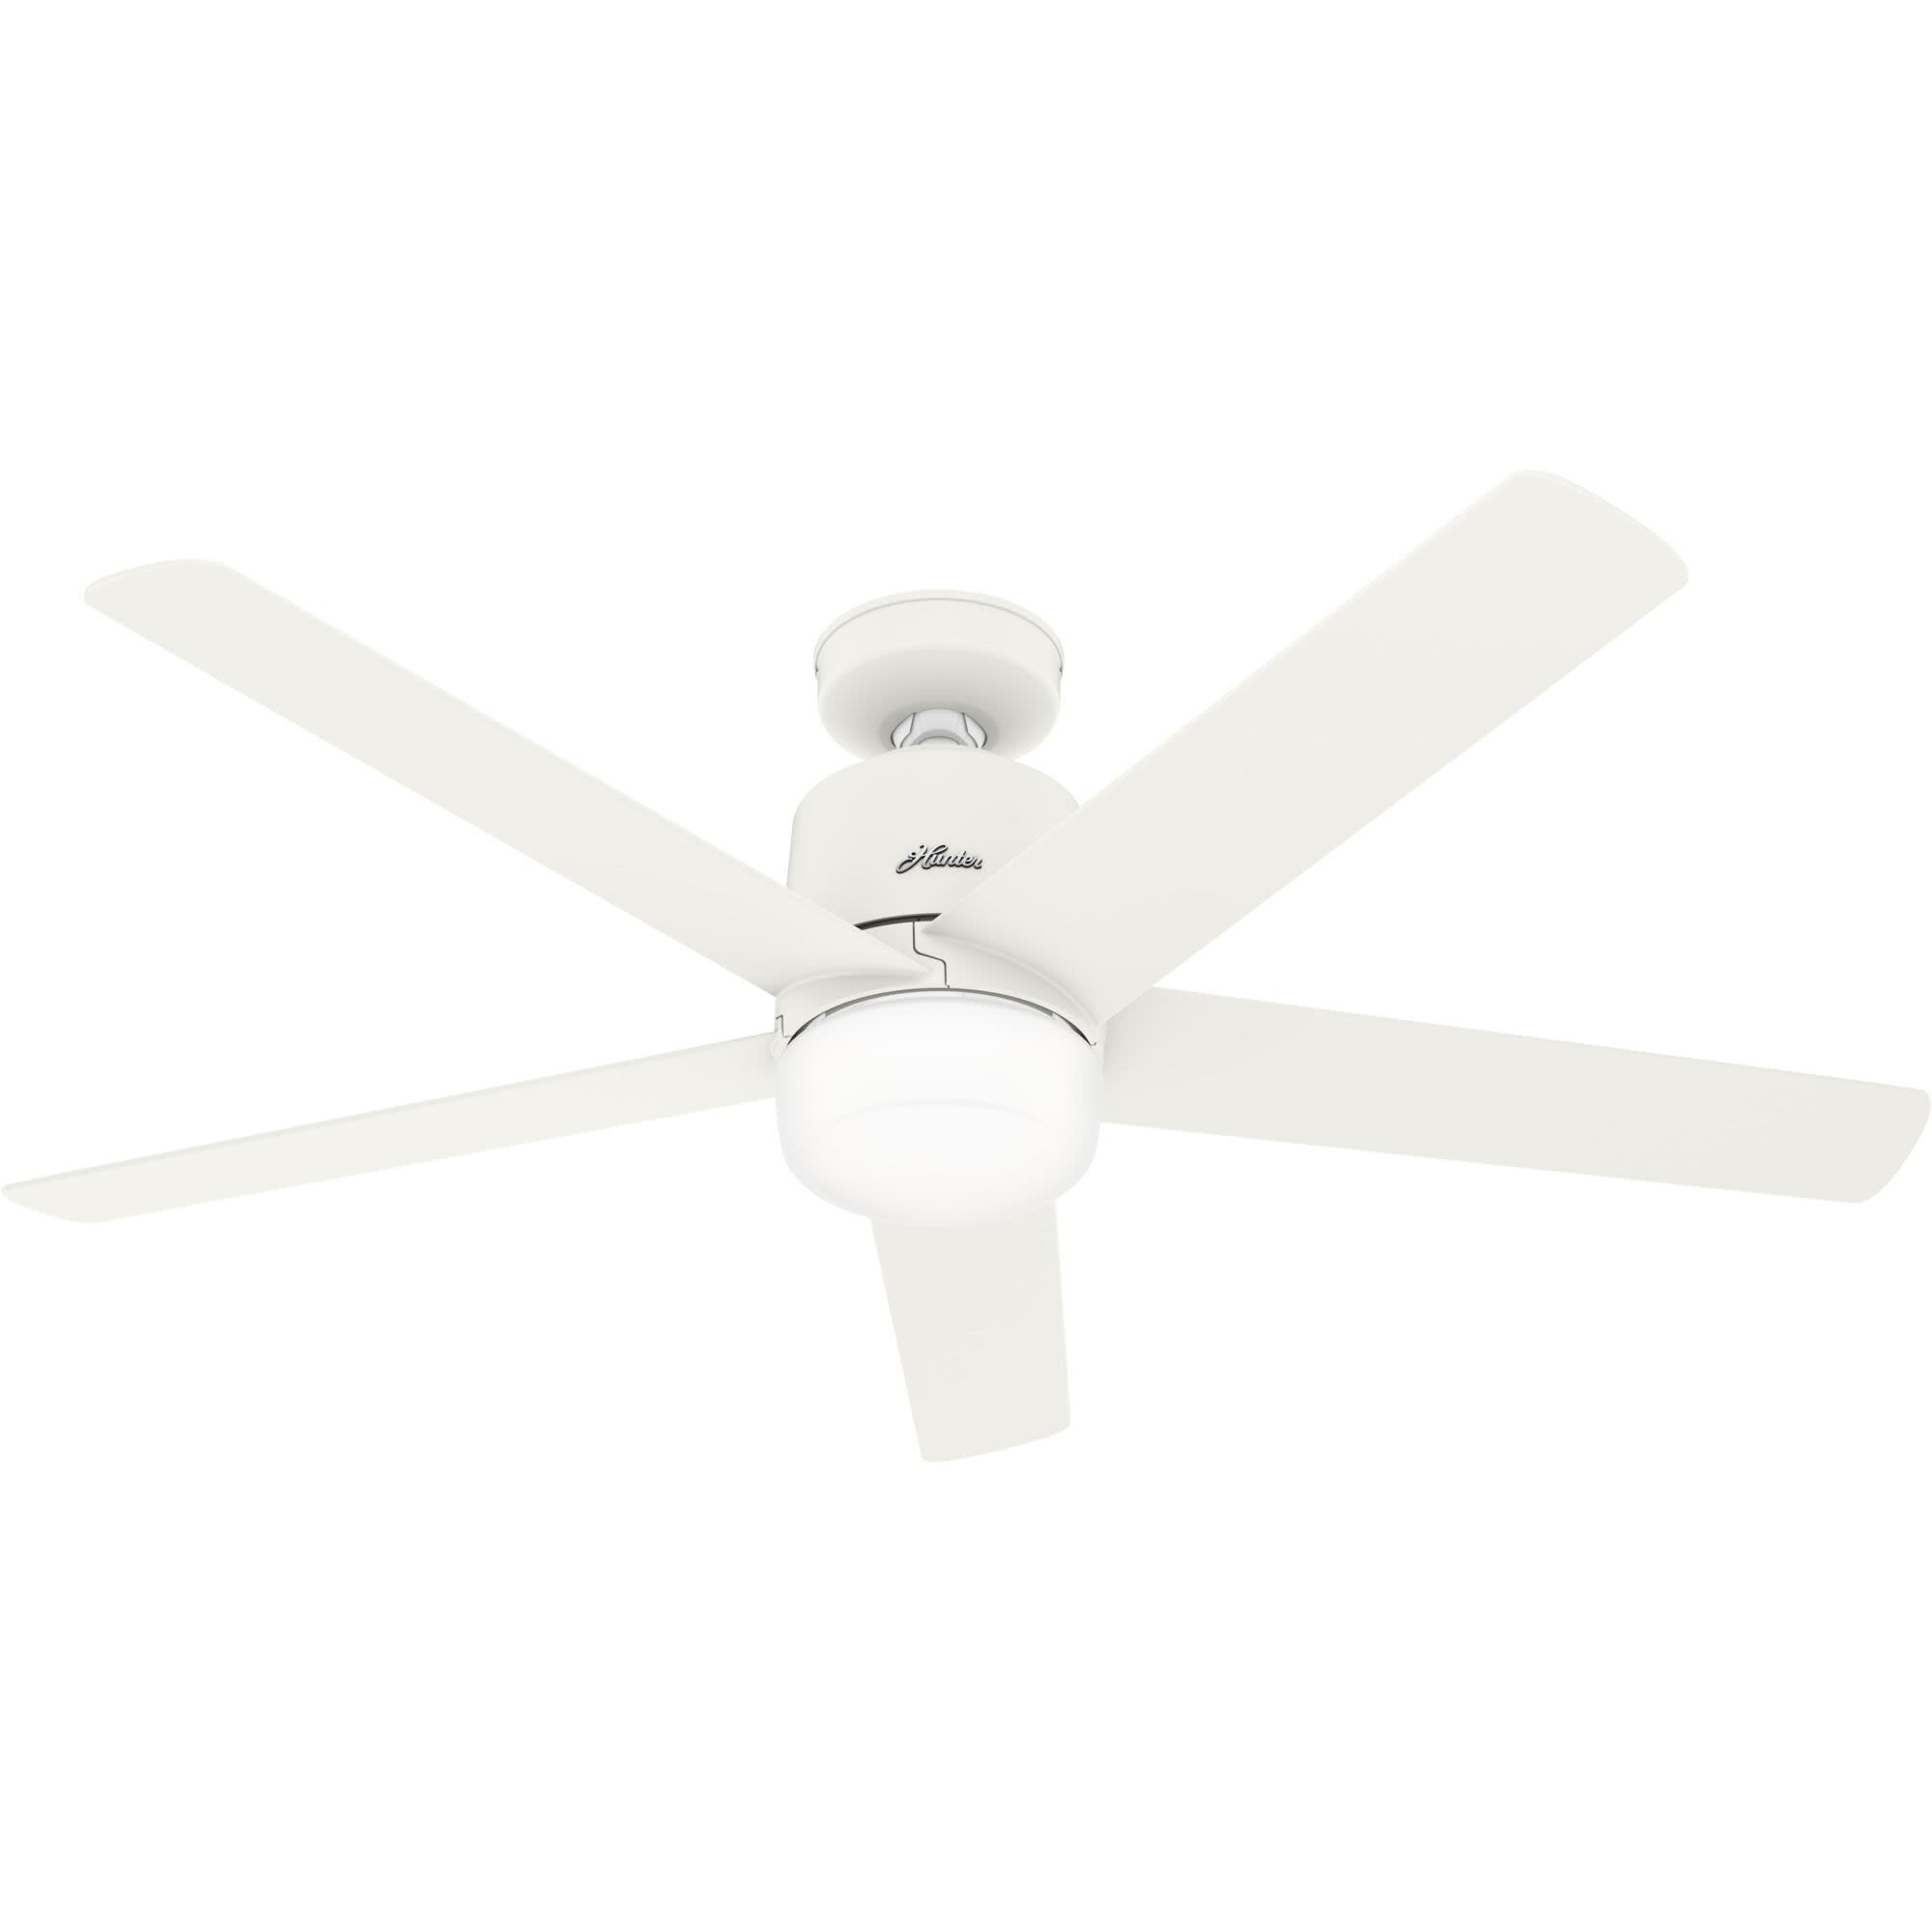 Hunter Stylus 52" 5 Blade Smart LED Ceiling Fan with Remote Control